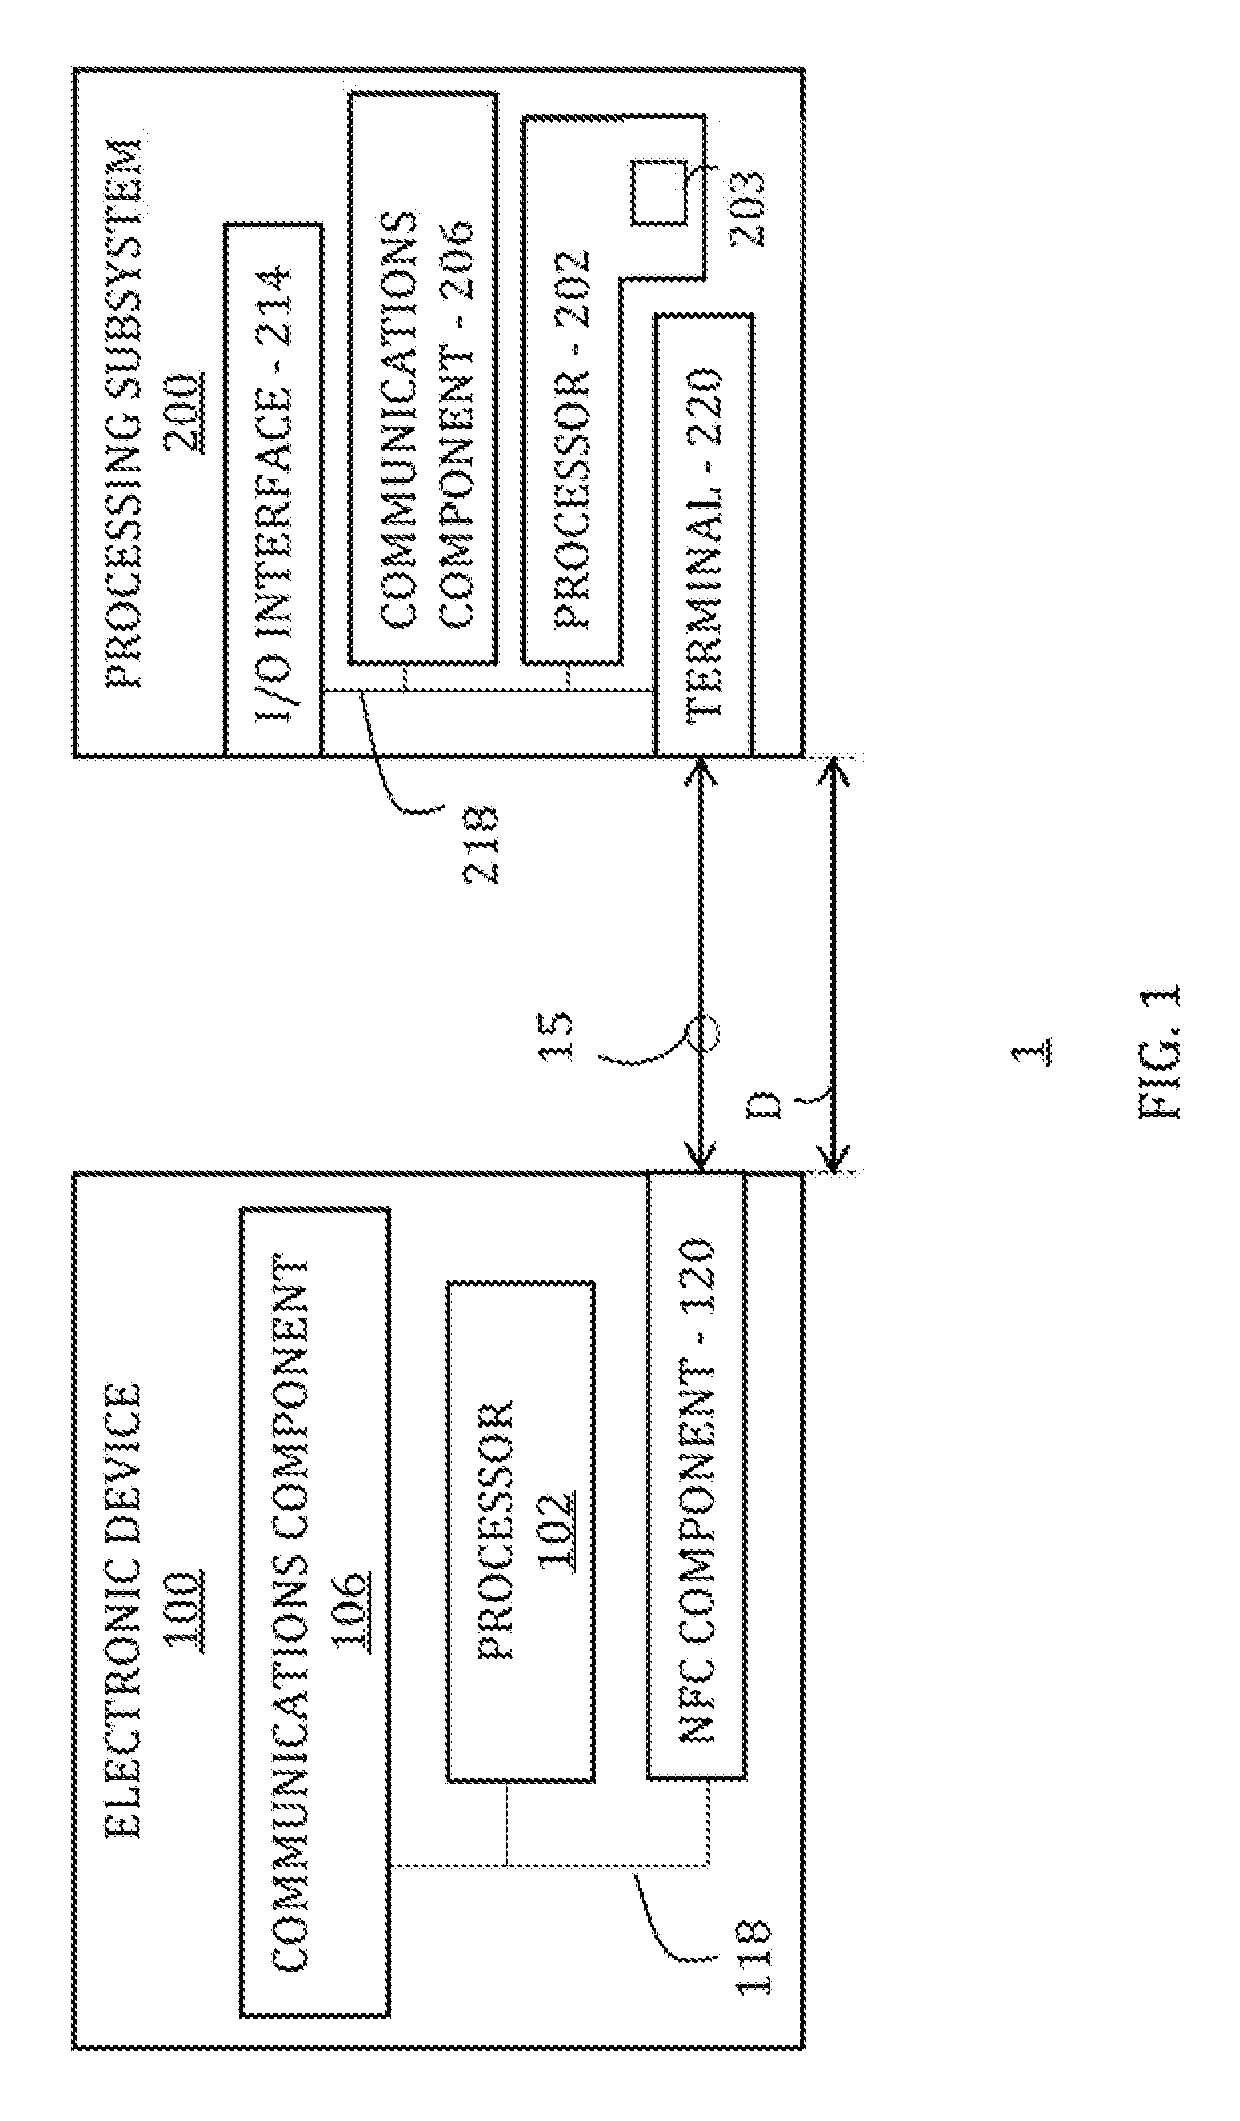 Priority based routing of data on an electronic device